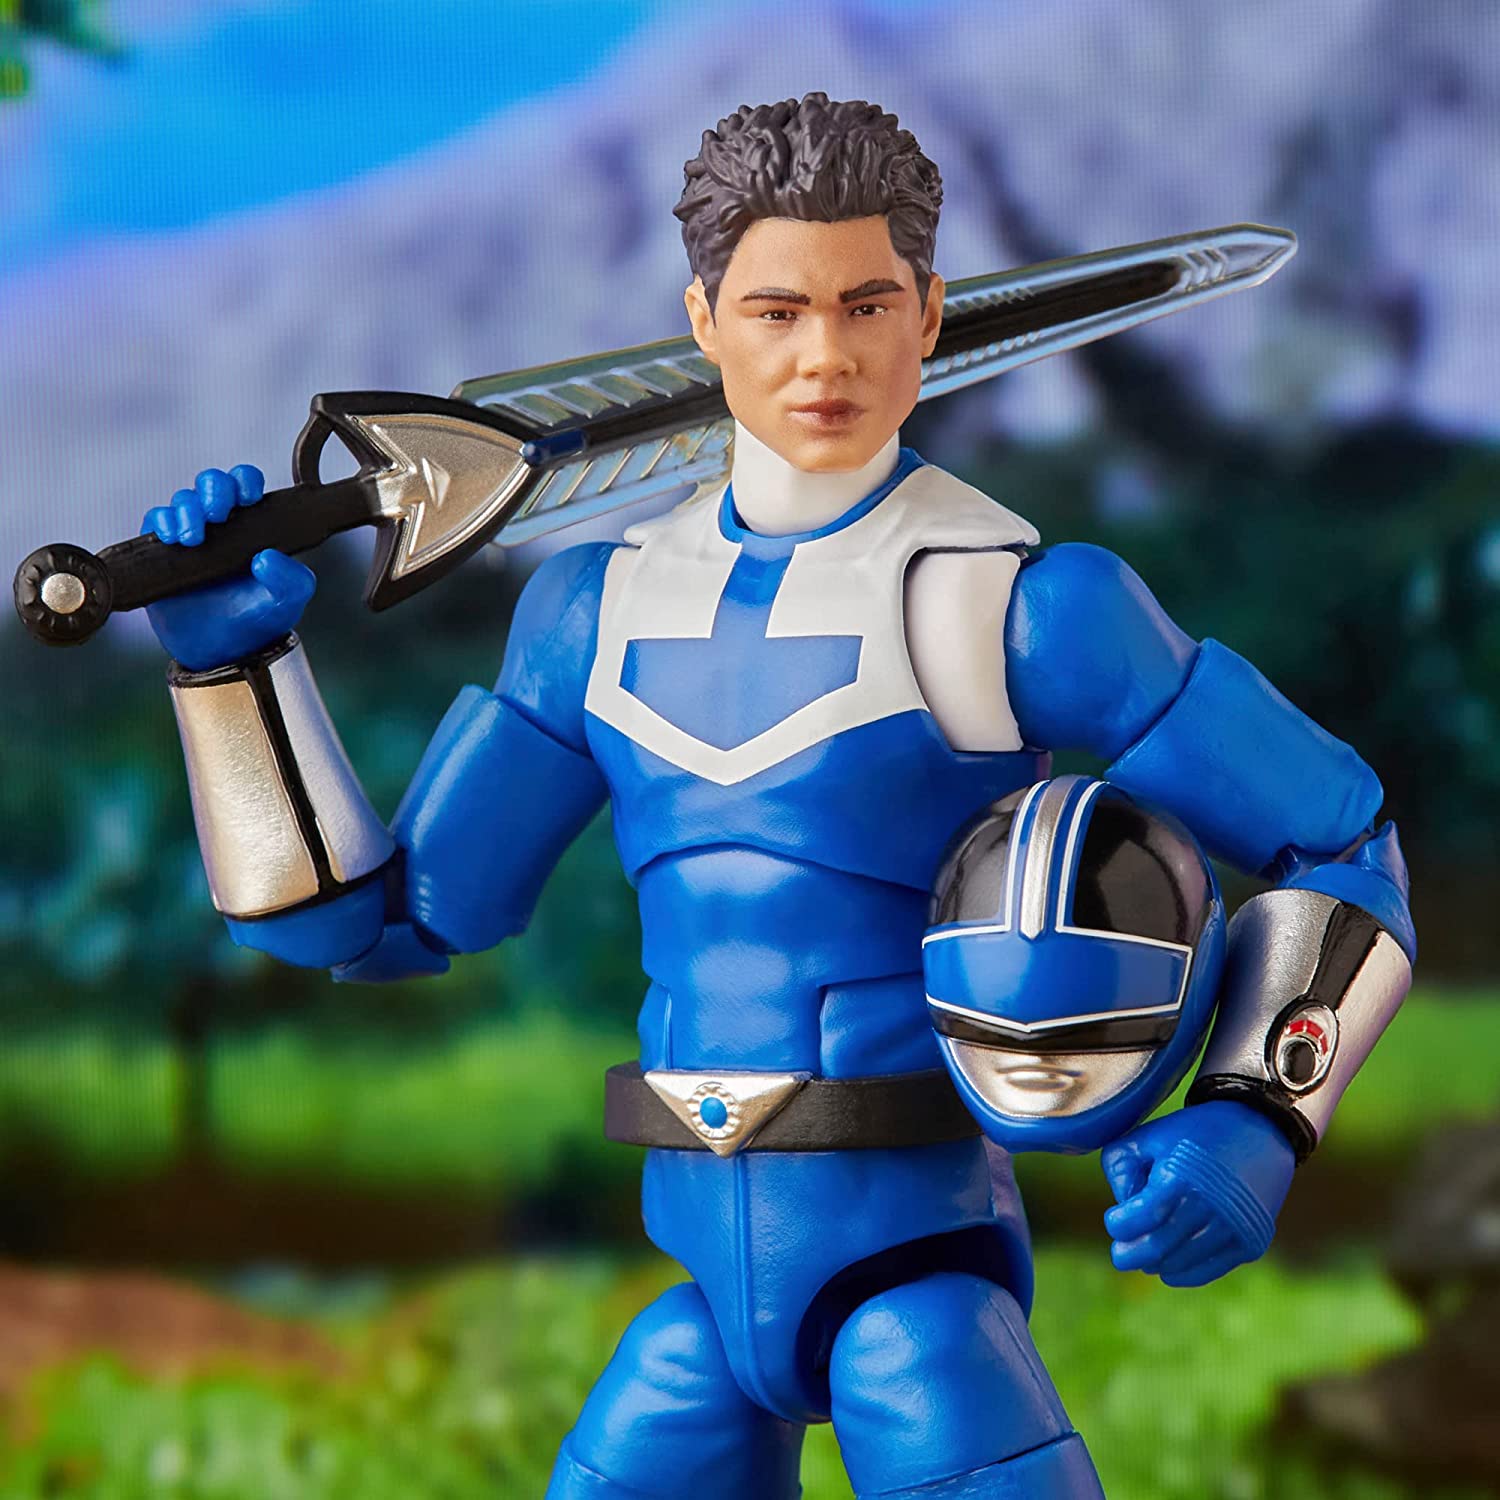 Power Rangers Dino Charge Lightning Collection Blue Ranger